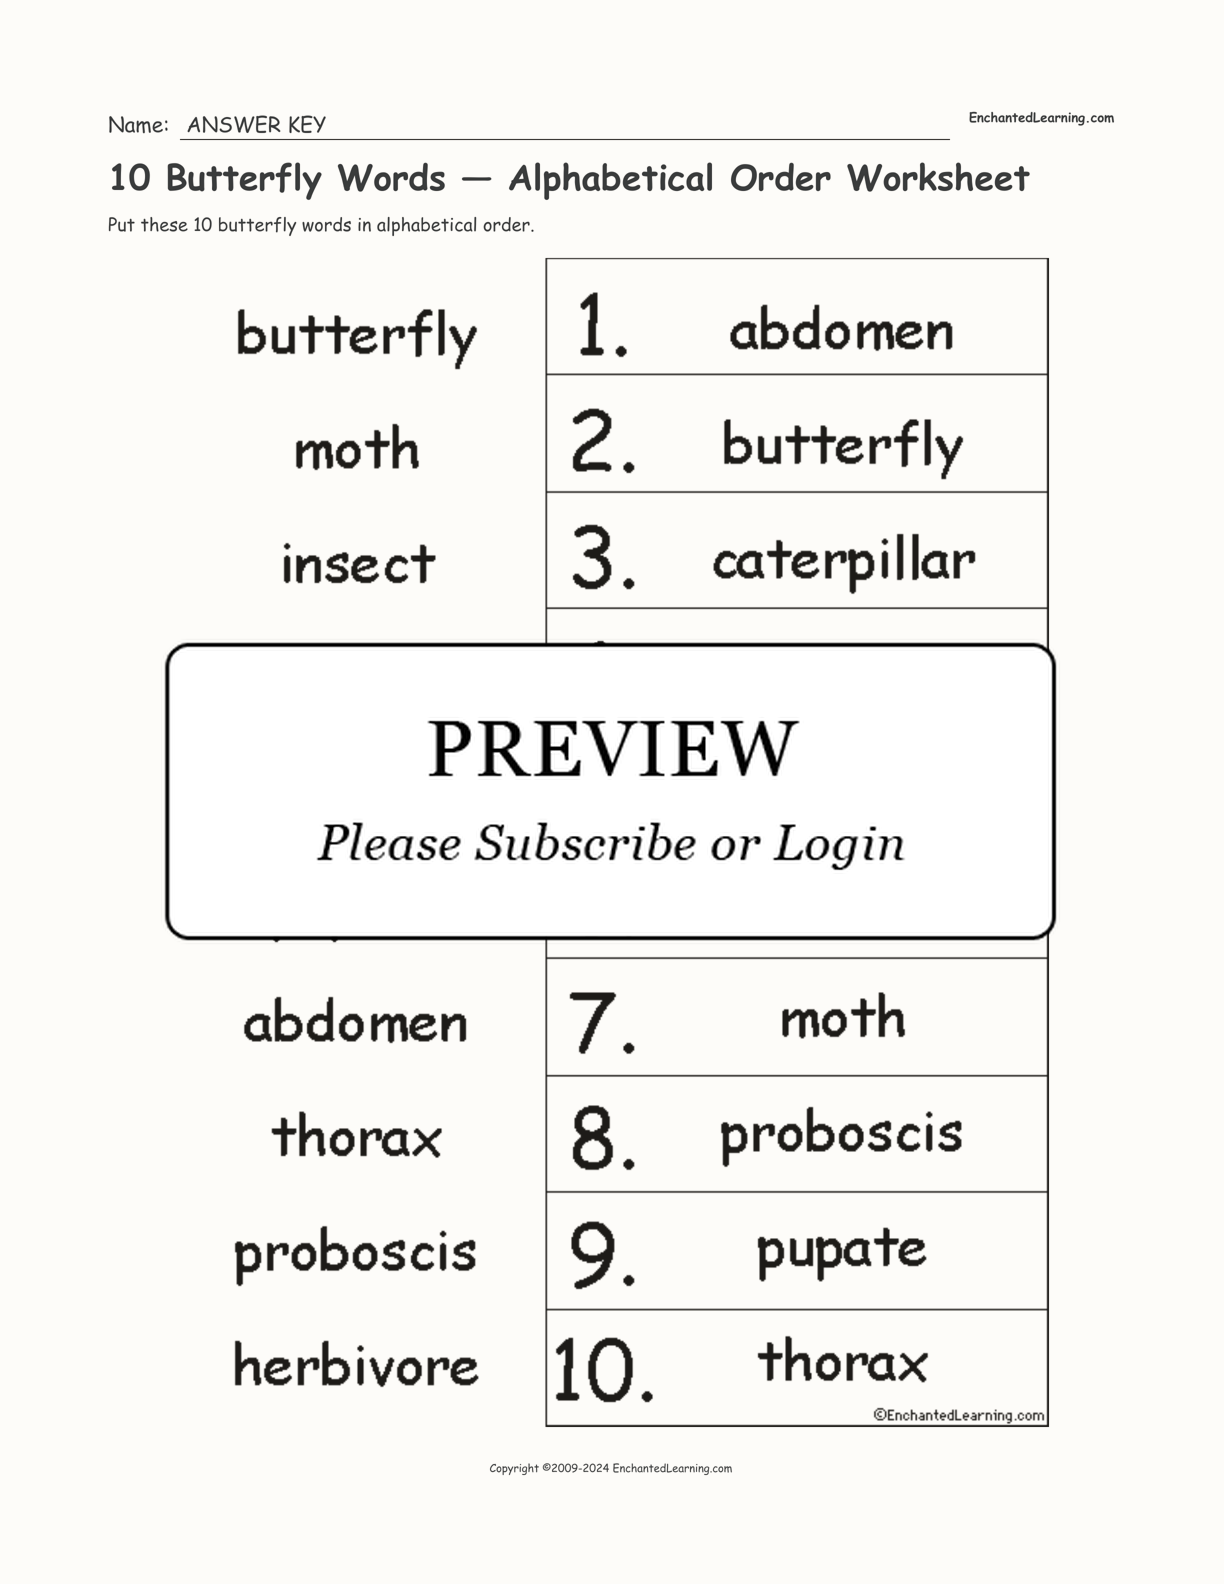 10 Butterfly Words — Alphabetical Order Worksheet interactive worksheet page 2